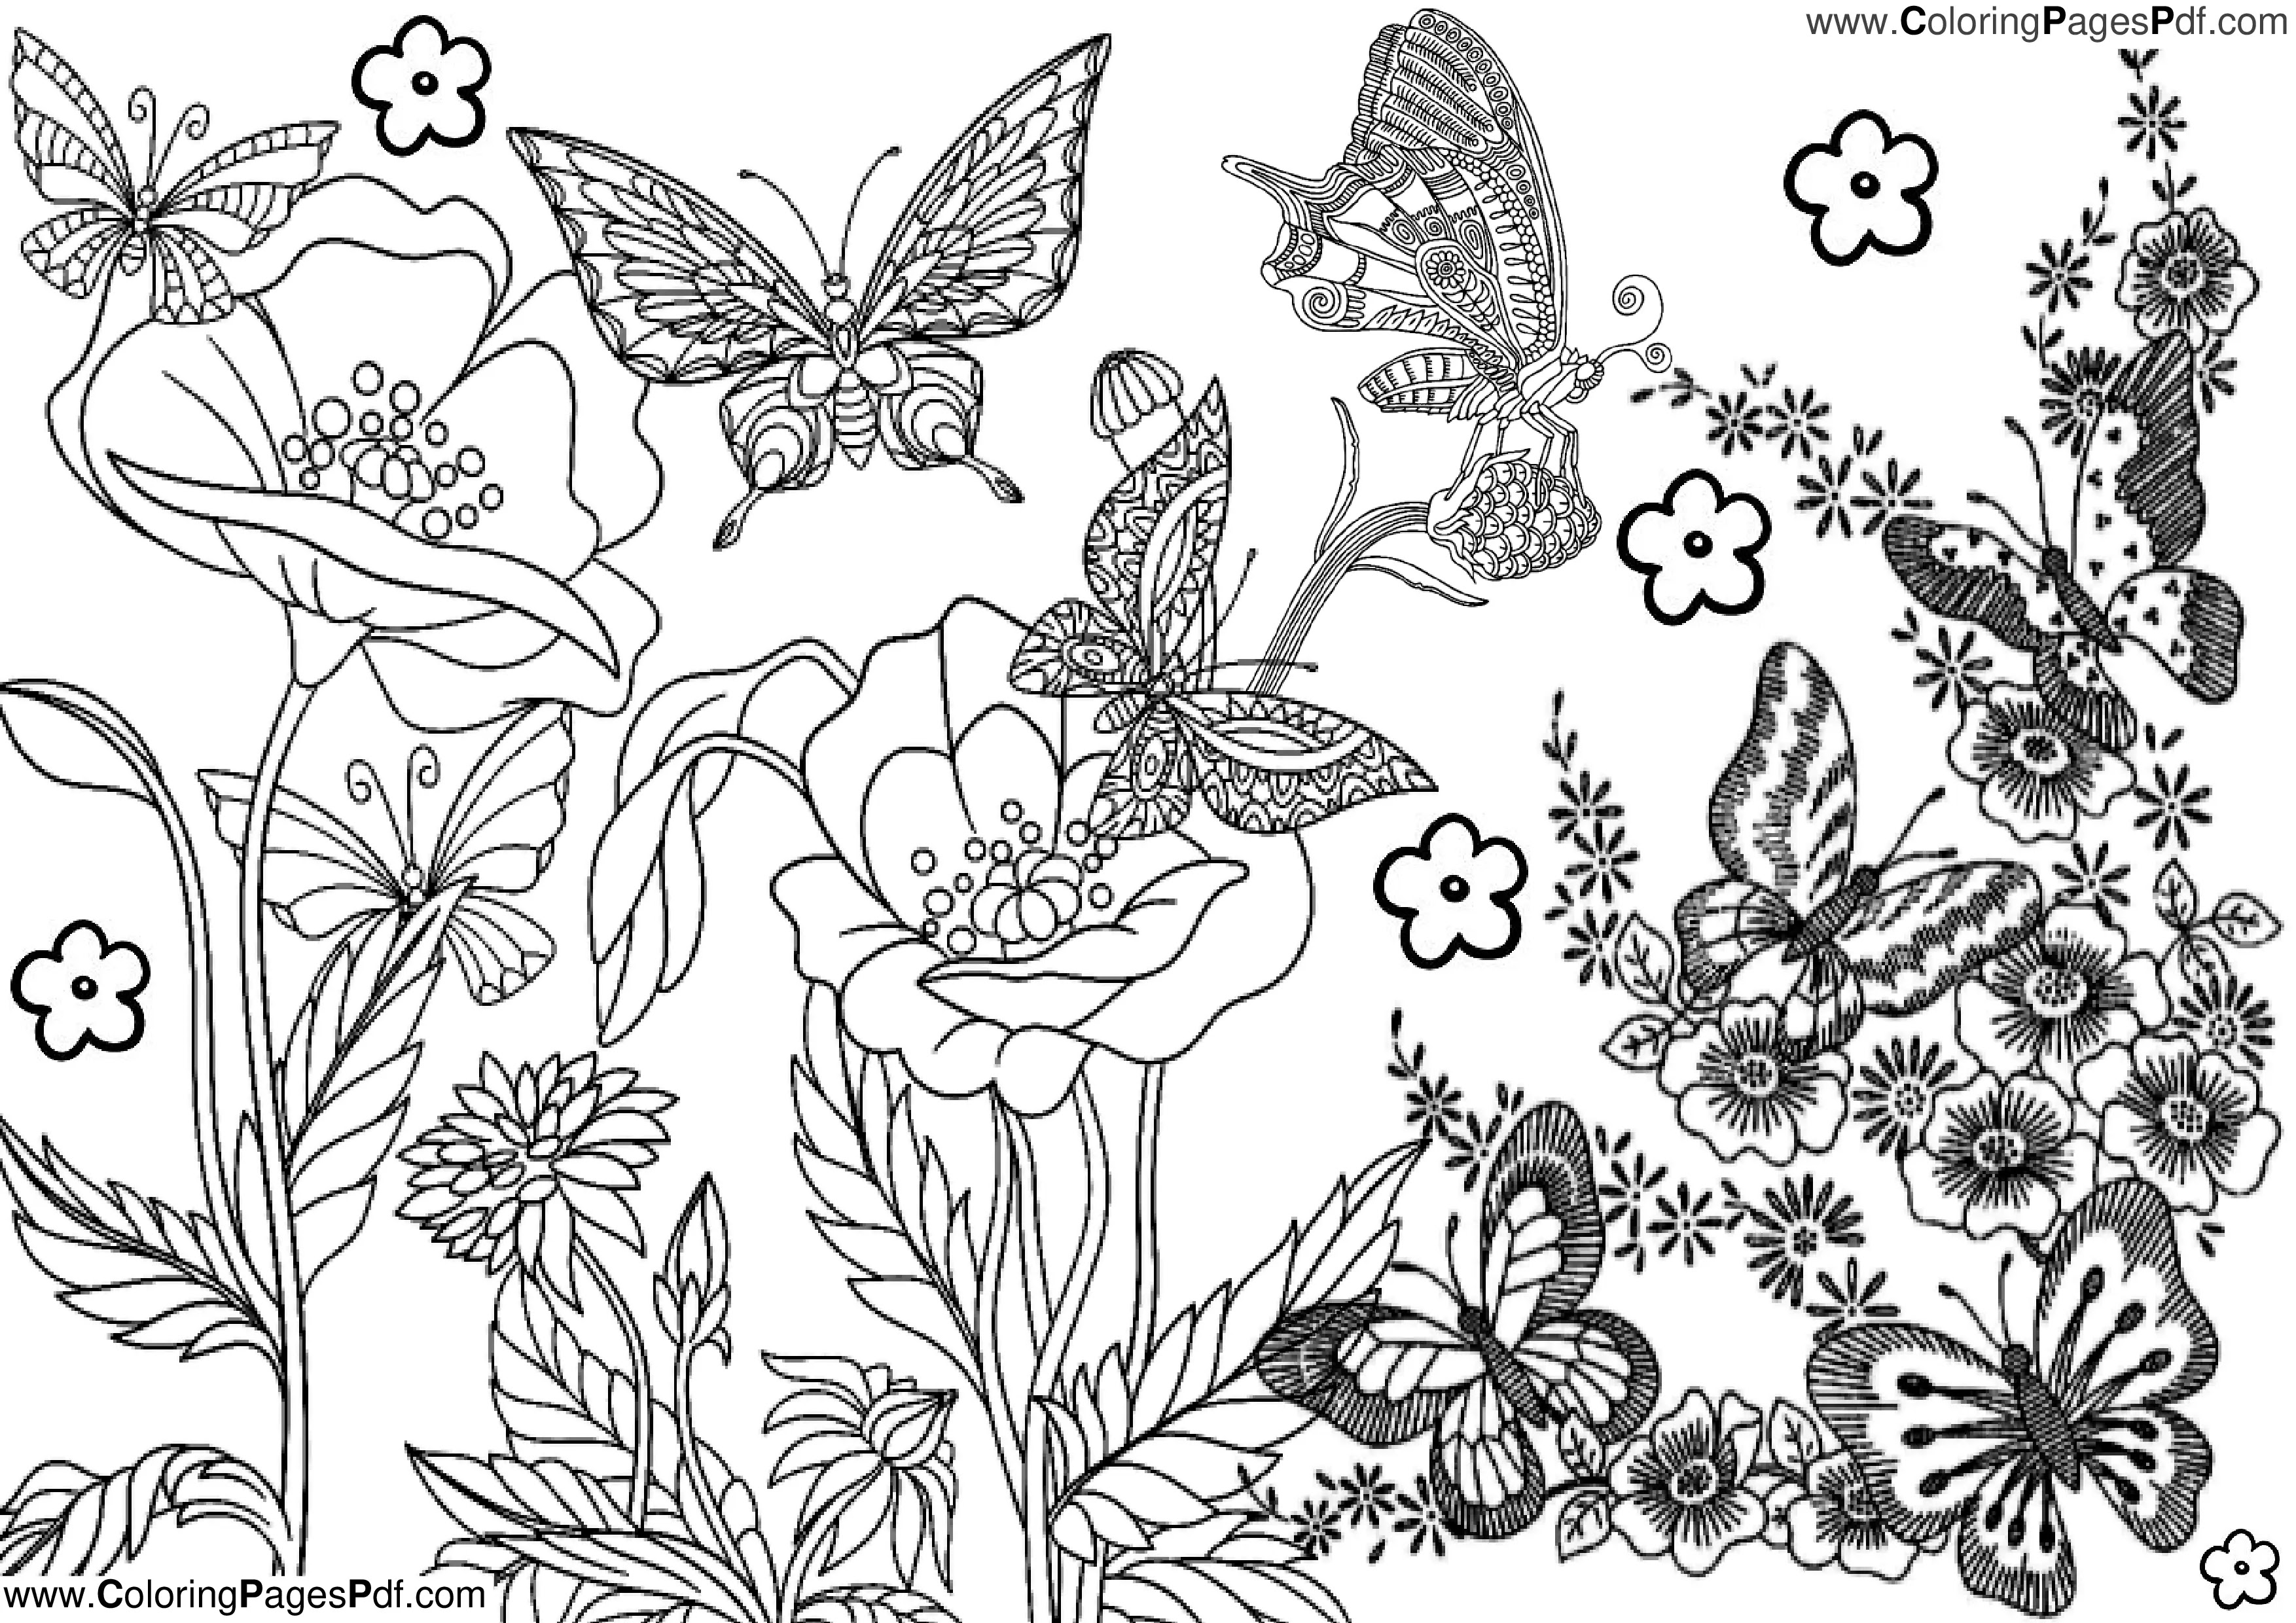 Coloring pictures of Flowers and Butterflies